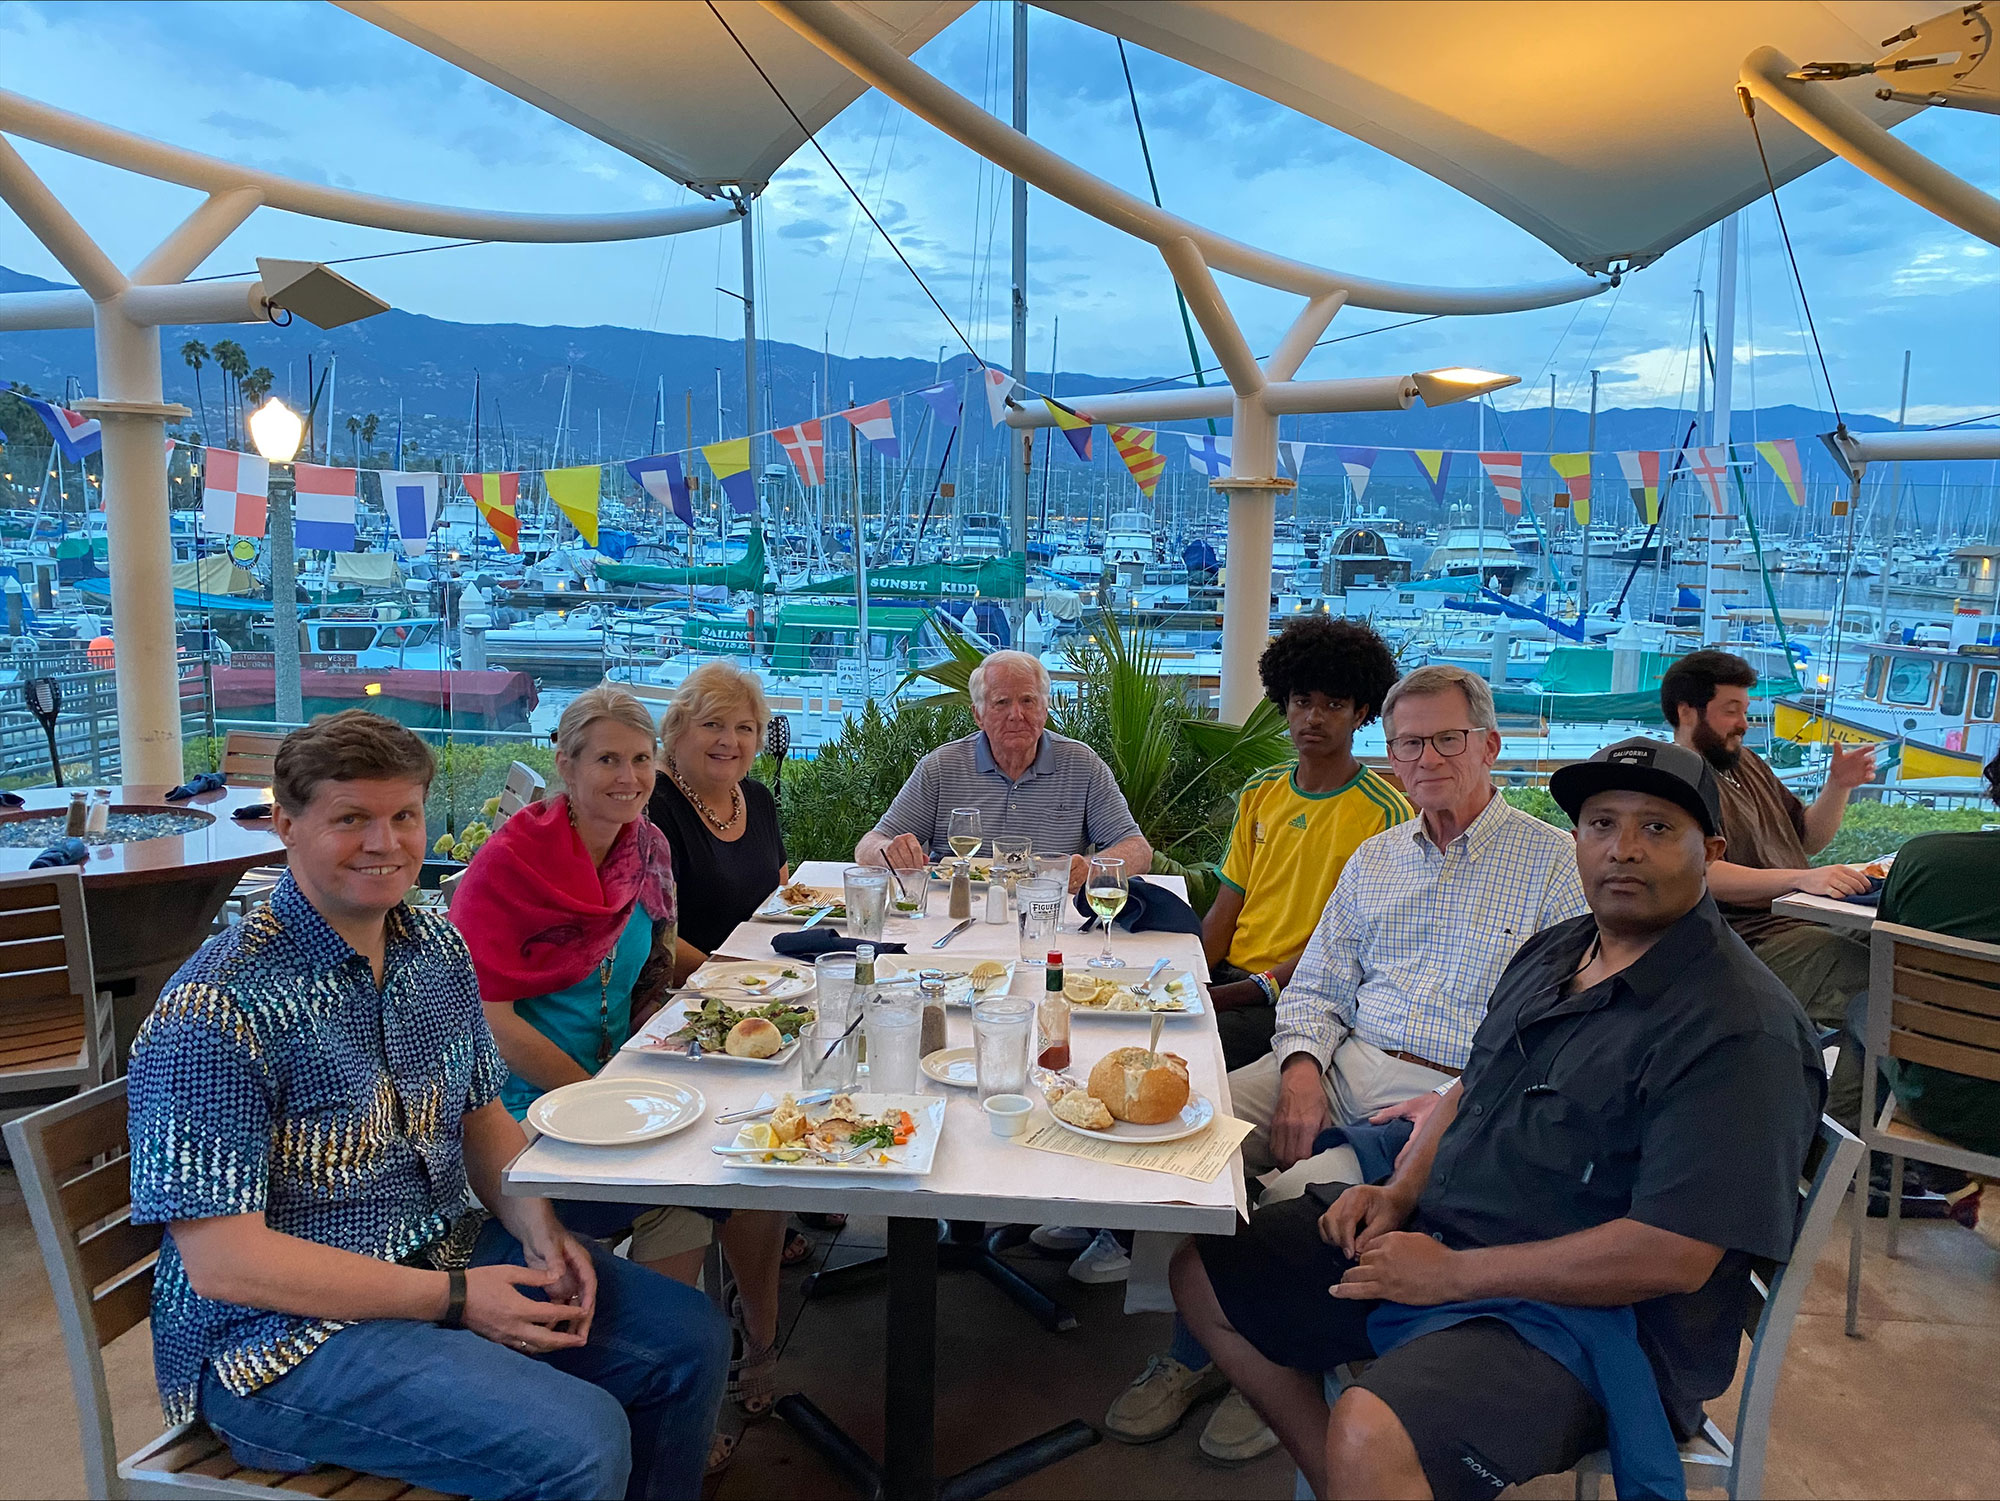 Together with members of First Presbyterian Church of Santa Barbara, dinner at the harbor